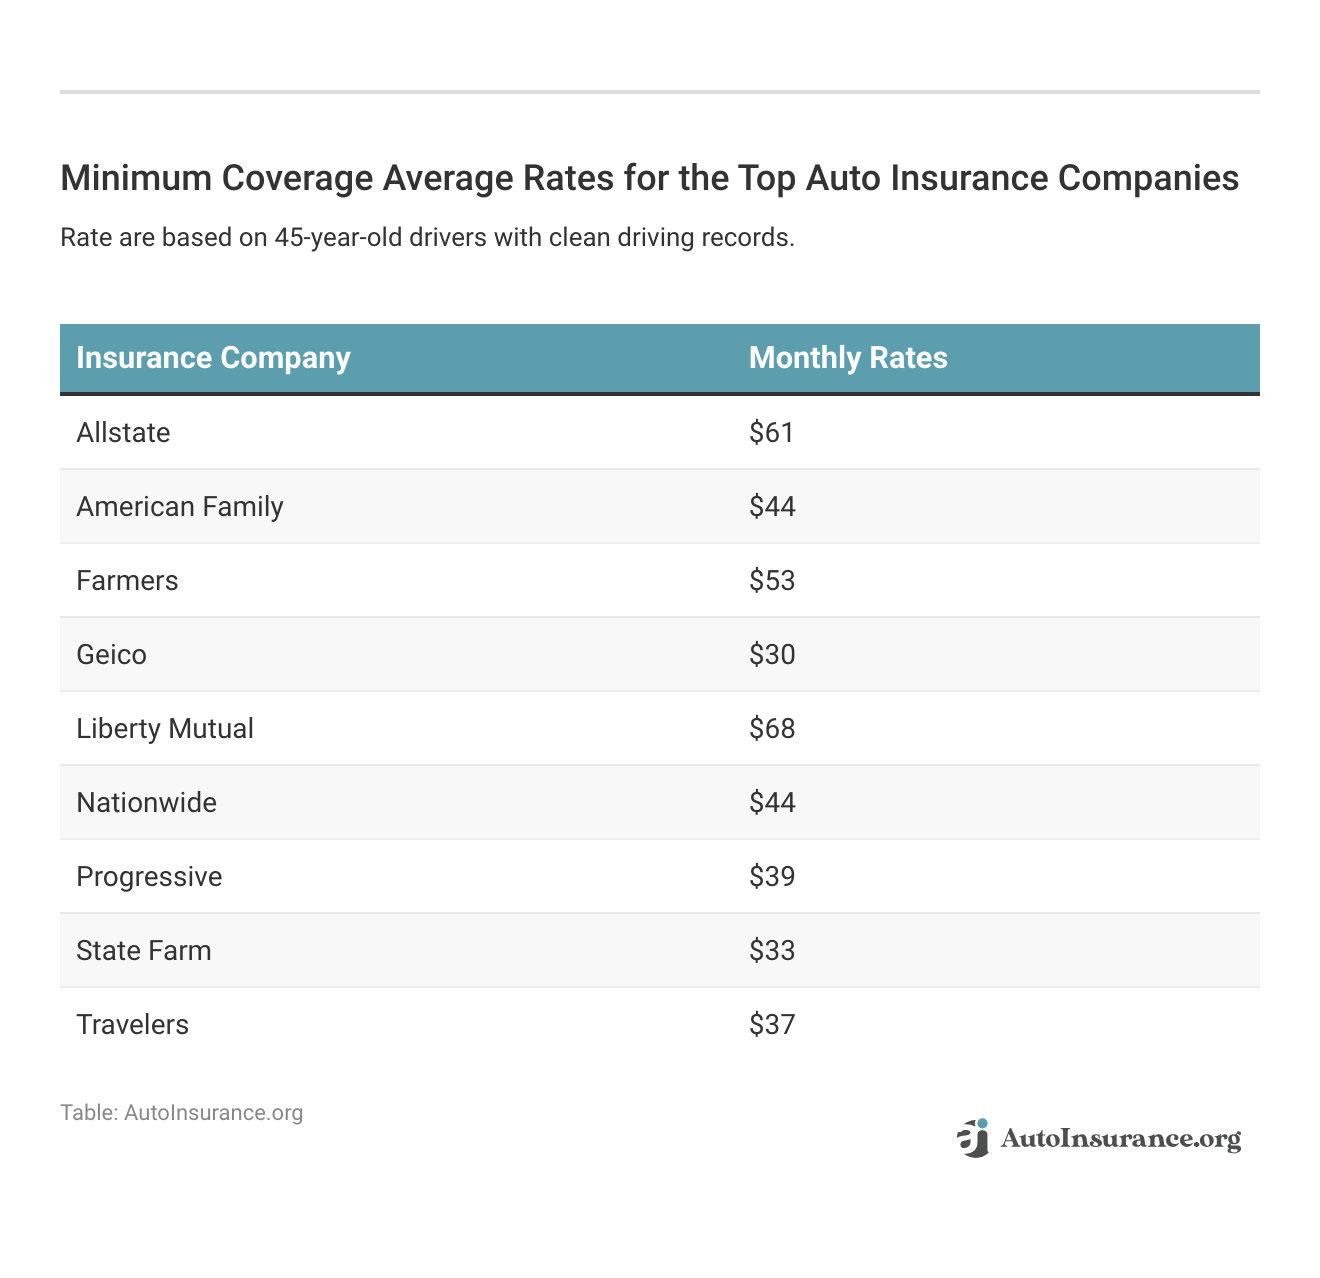 <h3>Minimum Coverage Average Rates for the Top Auto Insurance Companies<h3>